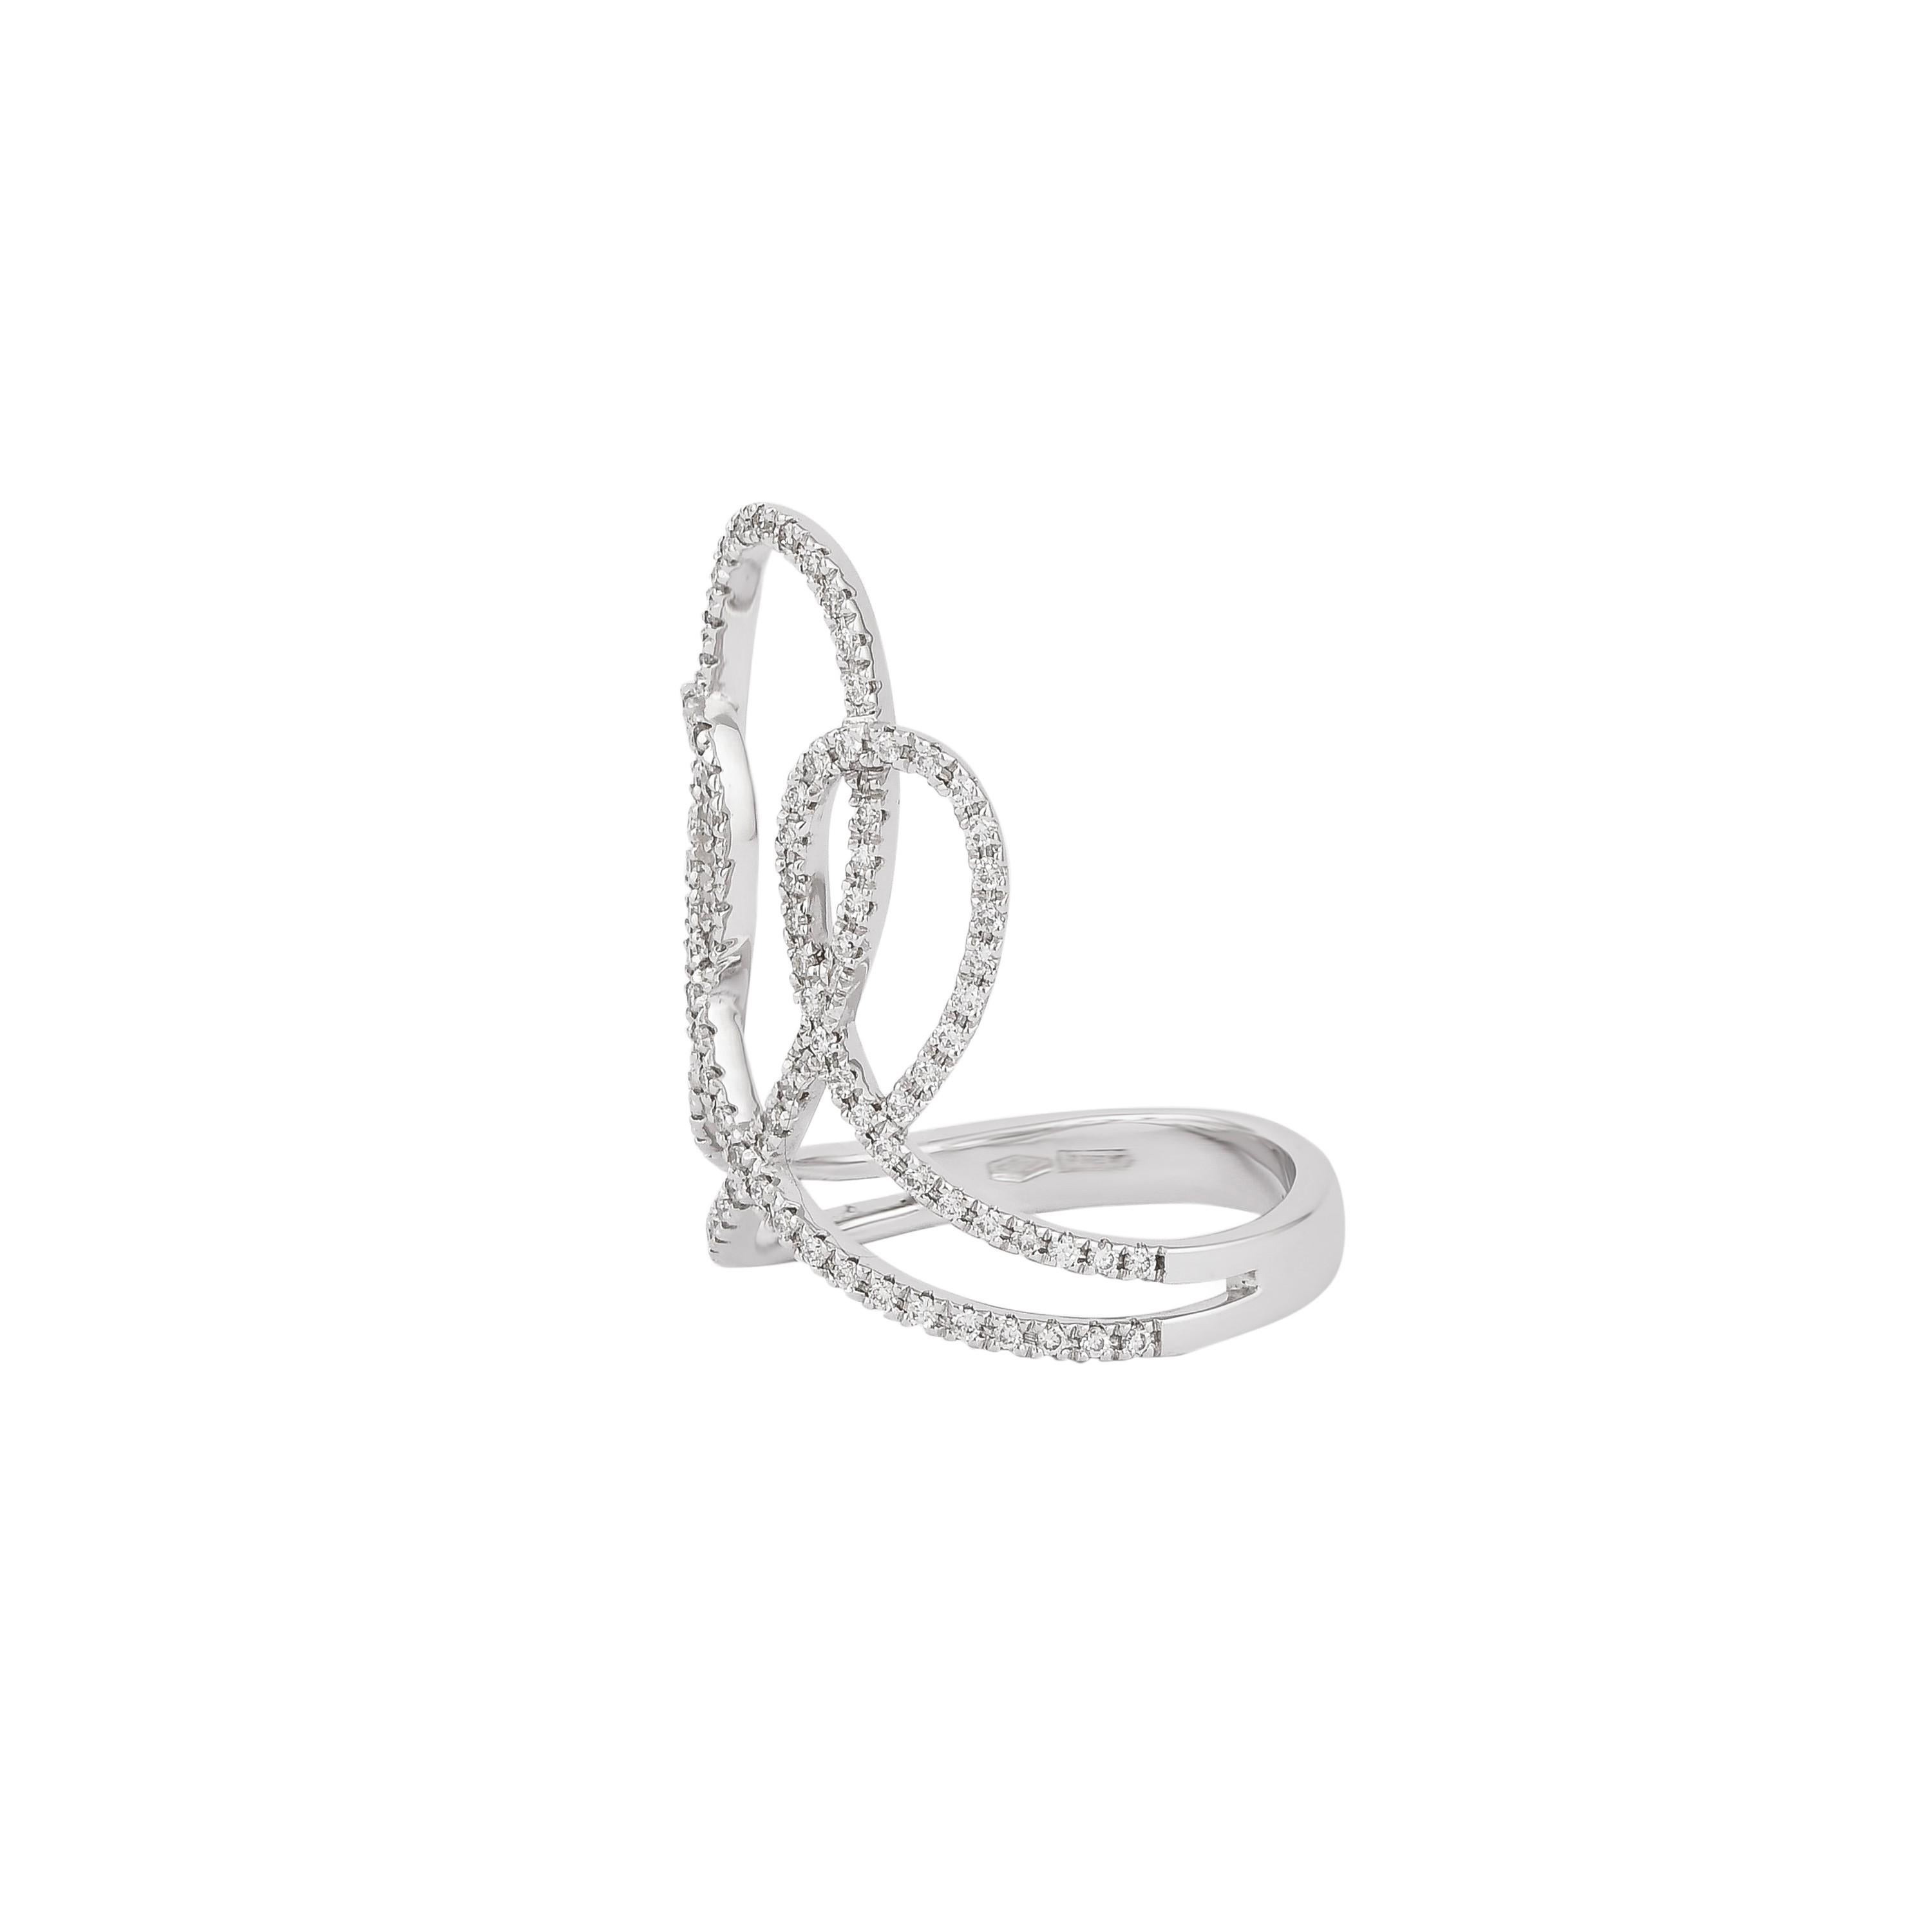 Contemporary 0.447 Carat Diamond Ring in 18 Karat White Gold For Sale